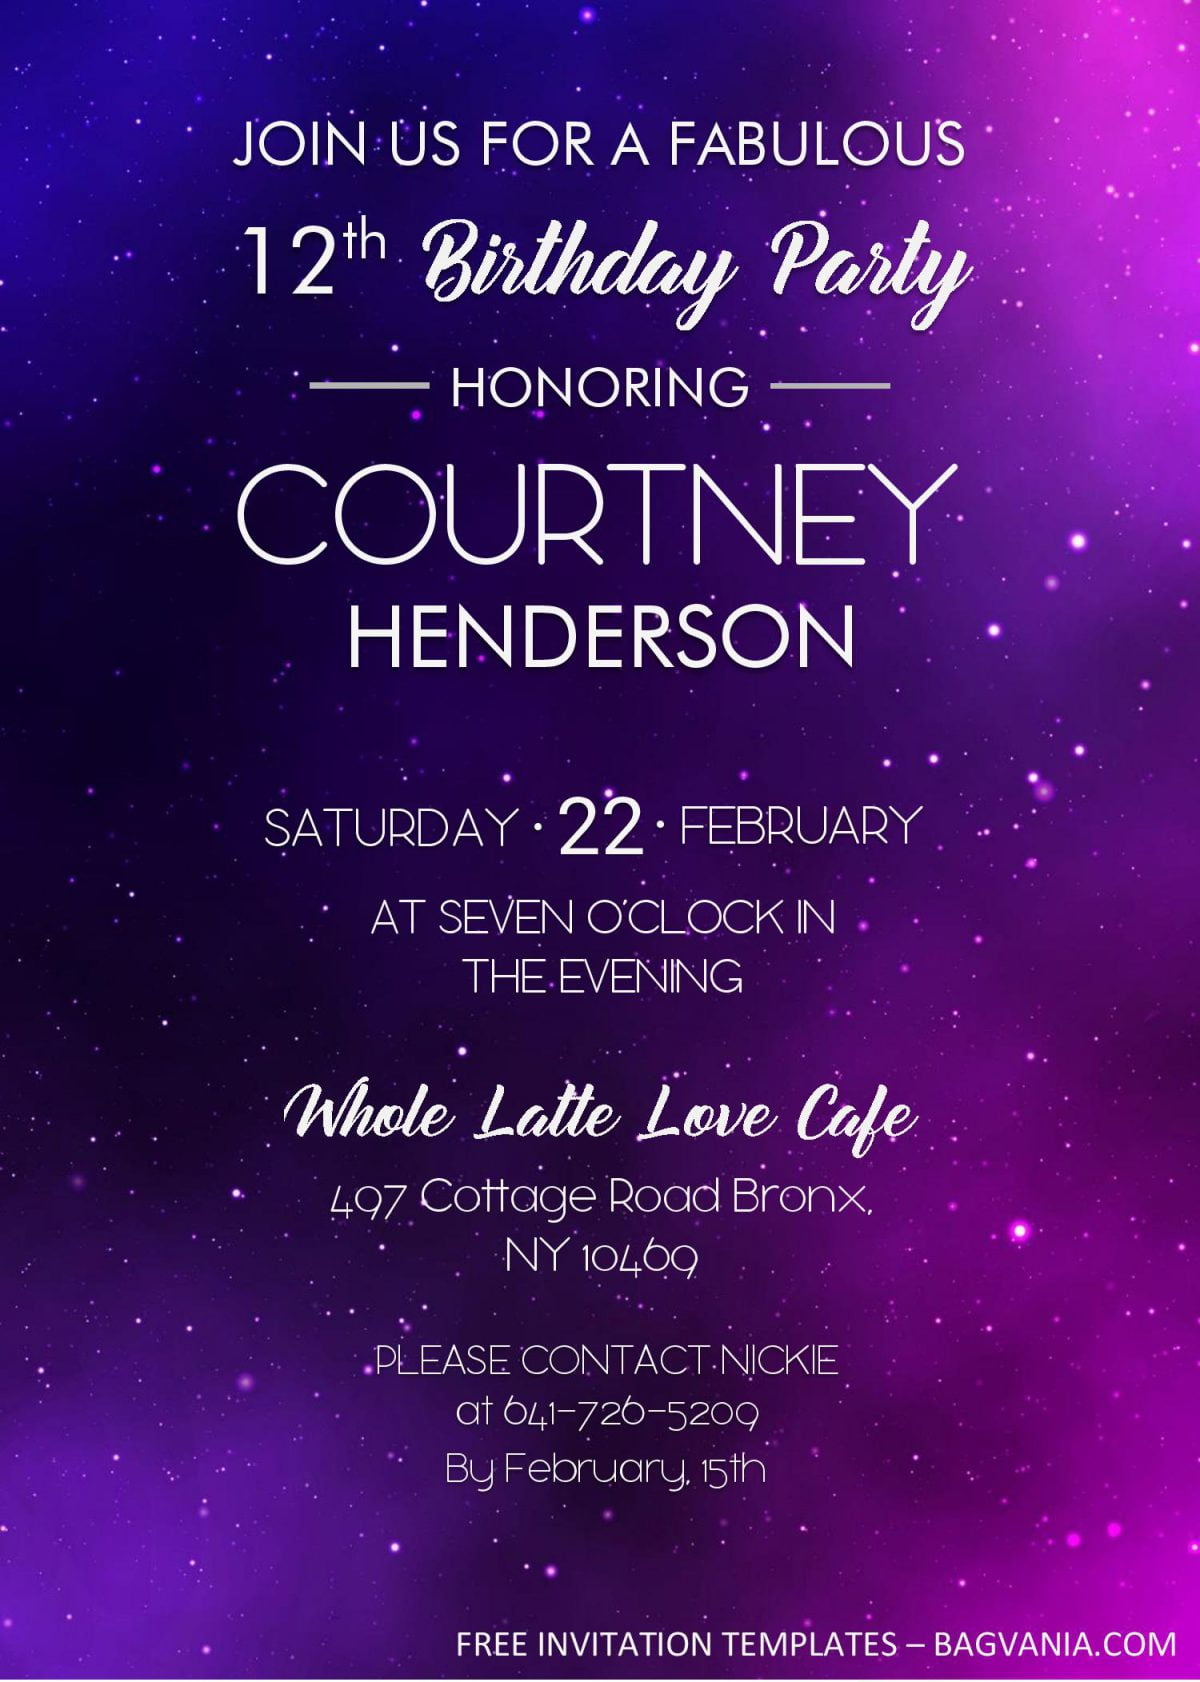 Galaxy Birthday Invitation Templates - Editable With MS Word and has stardust background